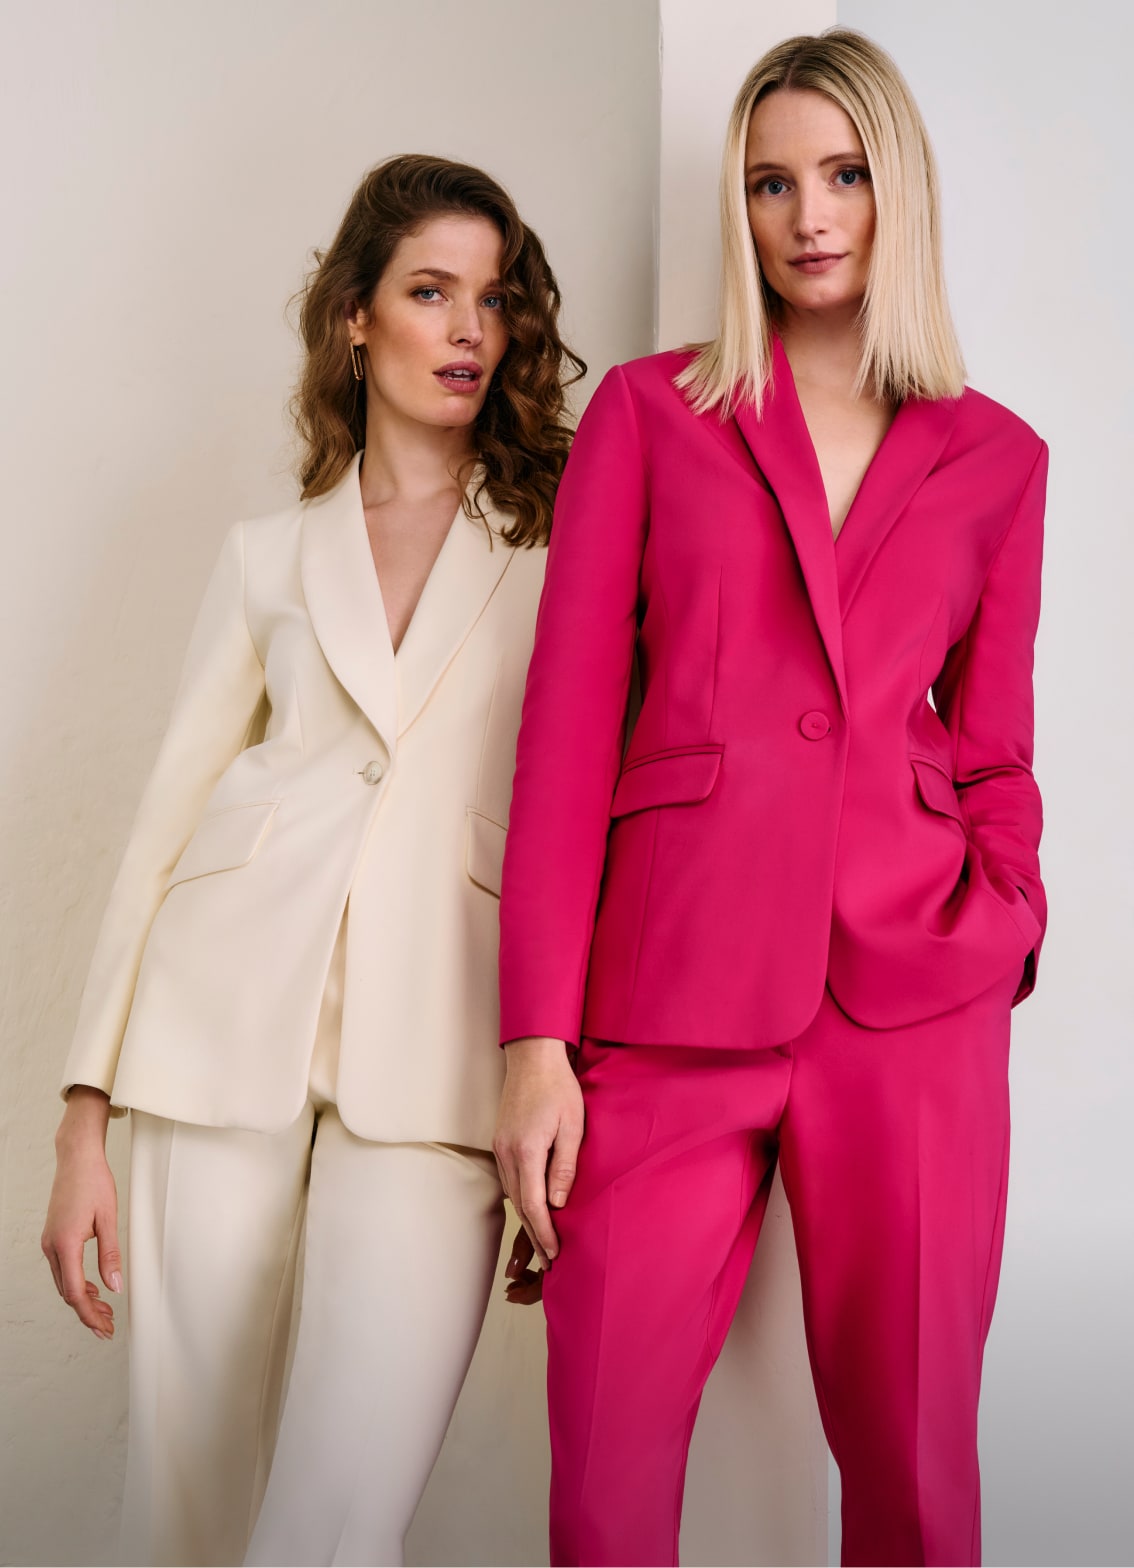 Women wearing Phase Eight suits